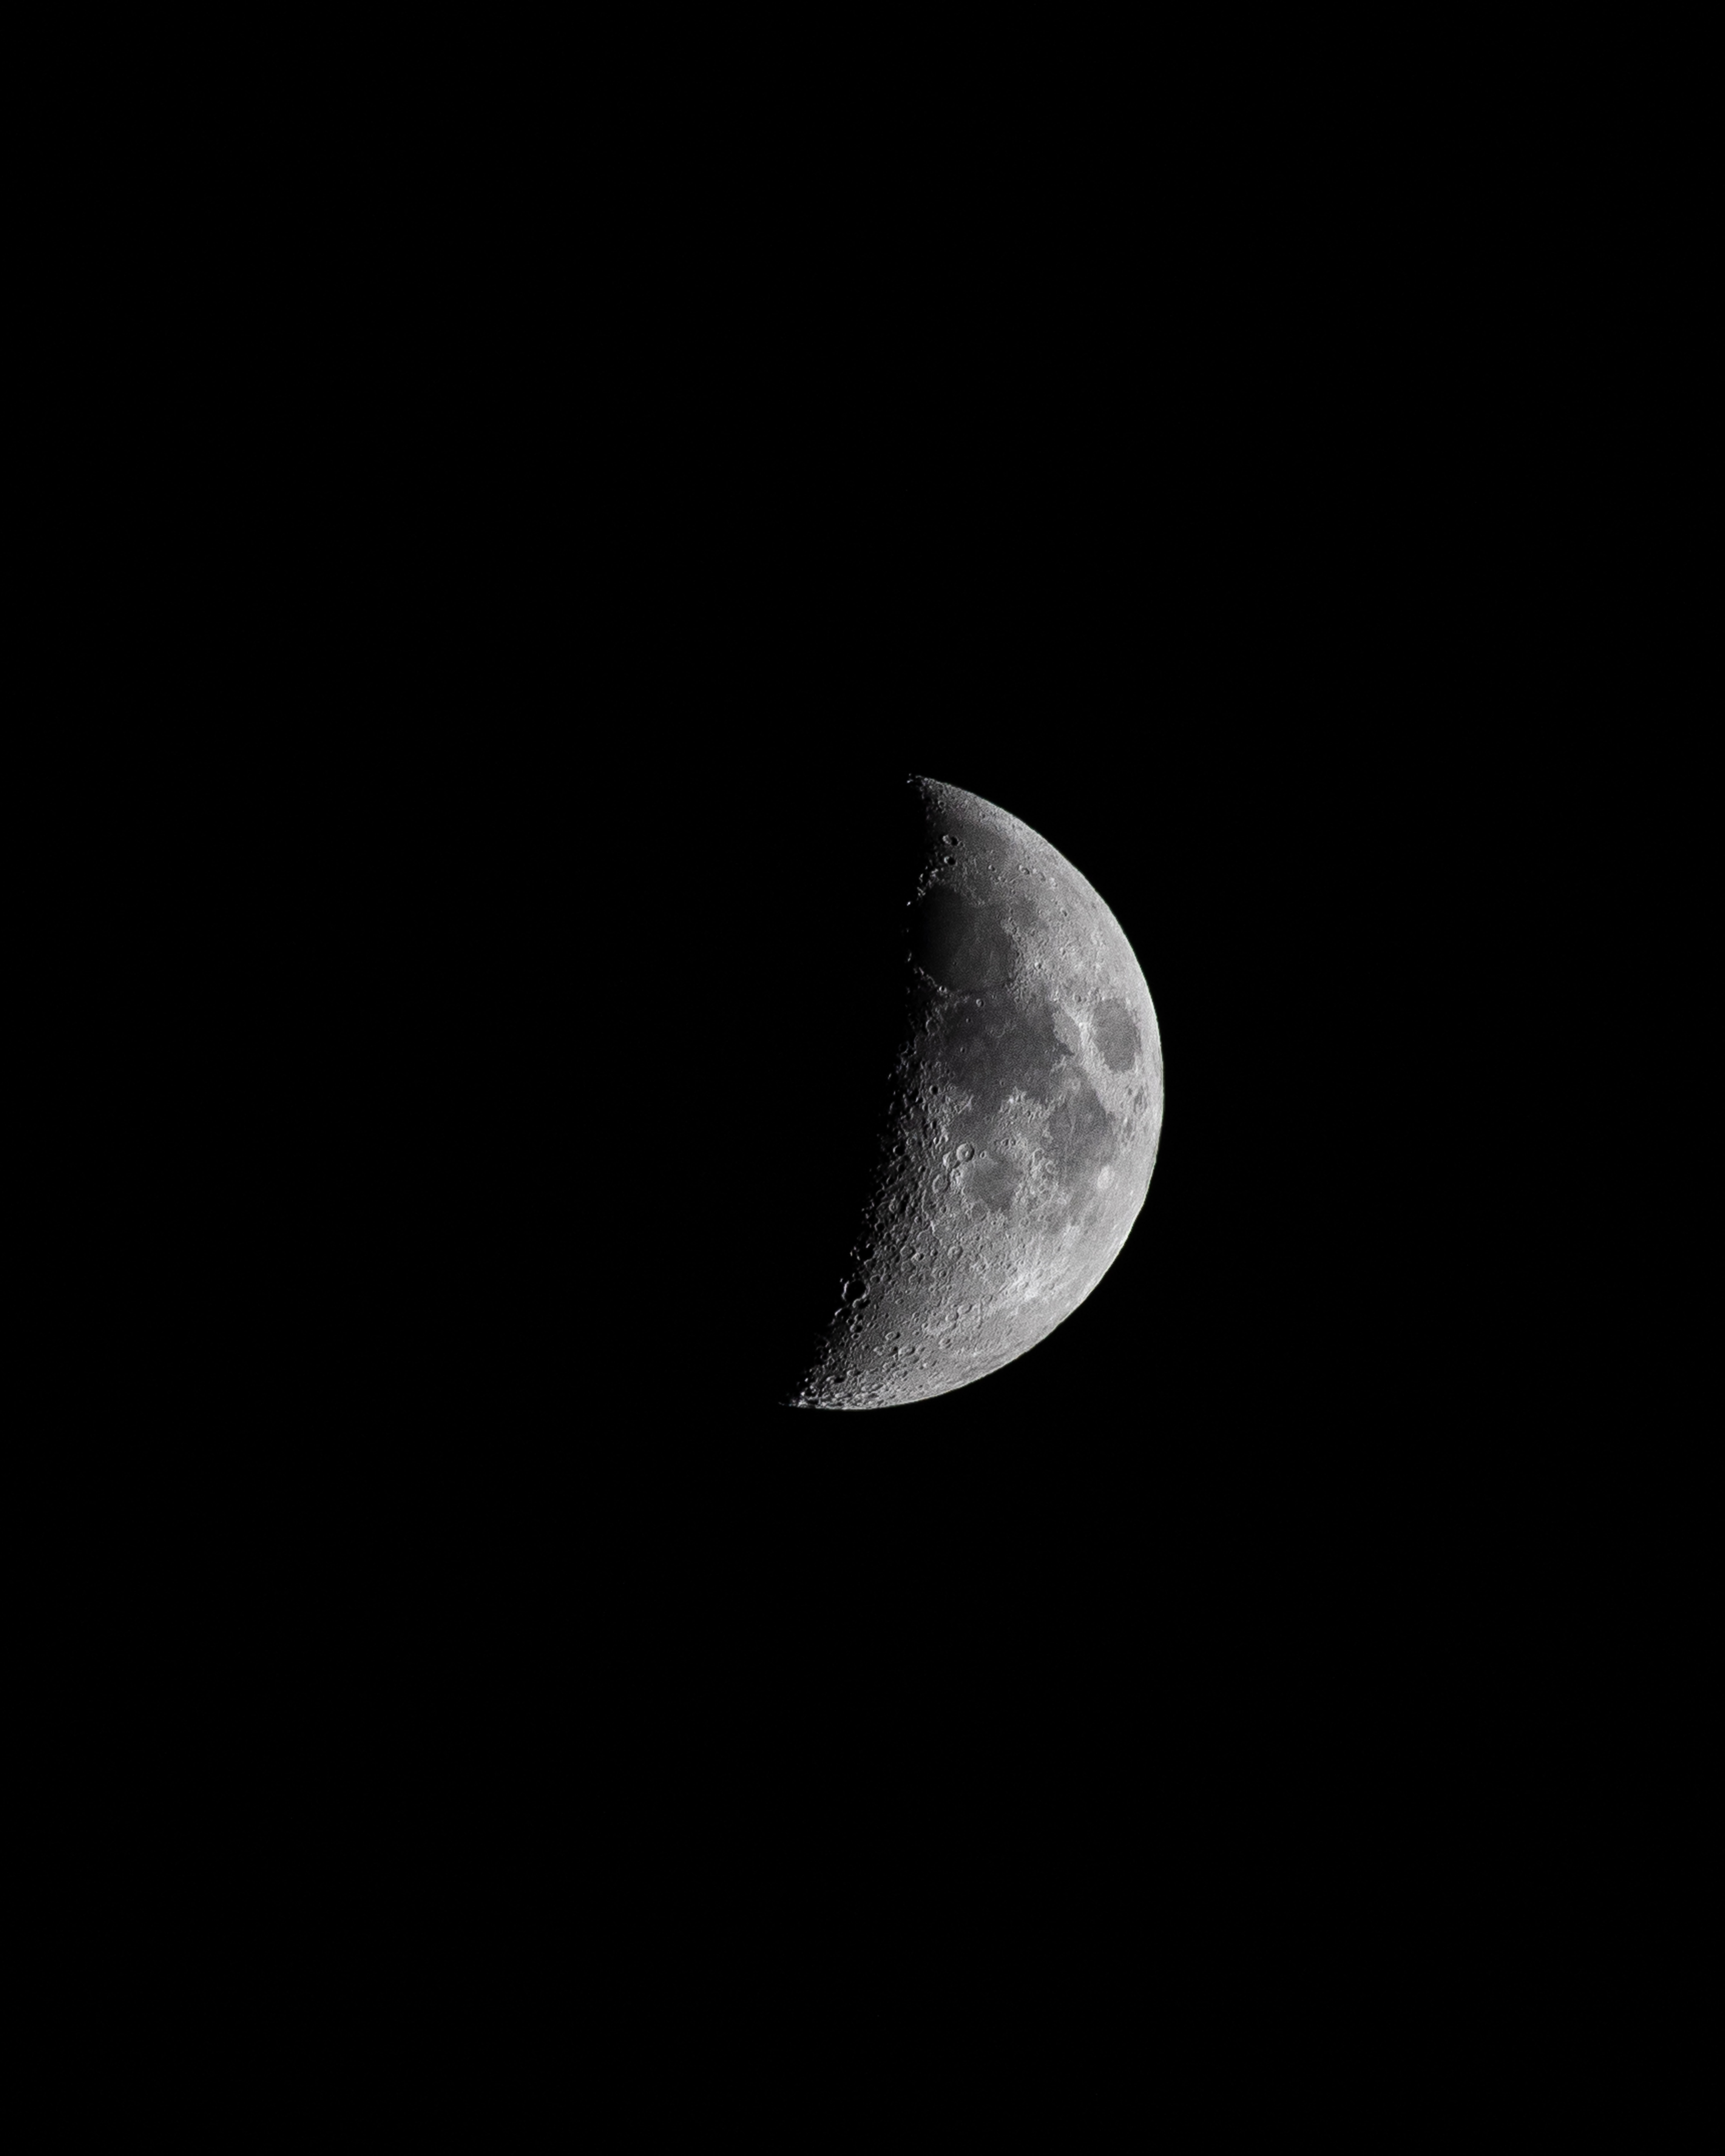 shadow, black, night, craters Moon Cellphone FHD pic